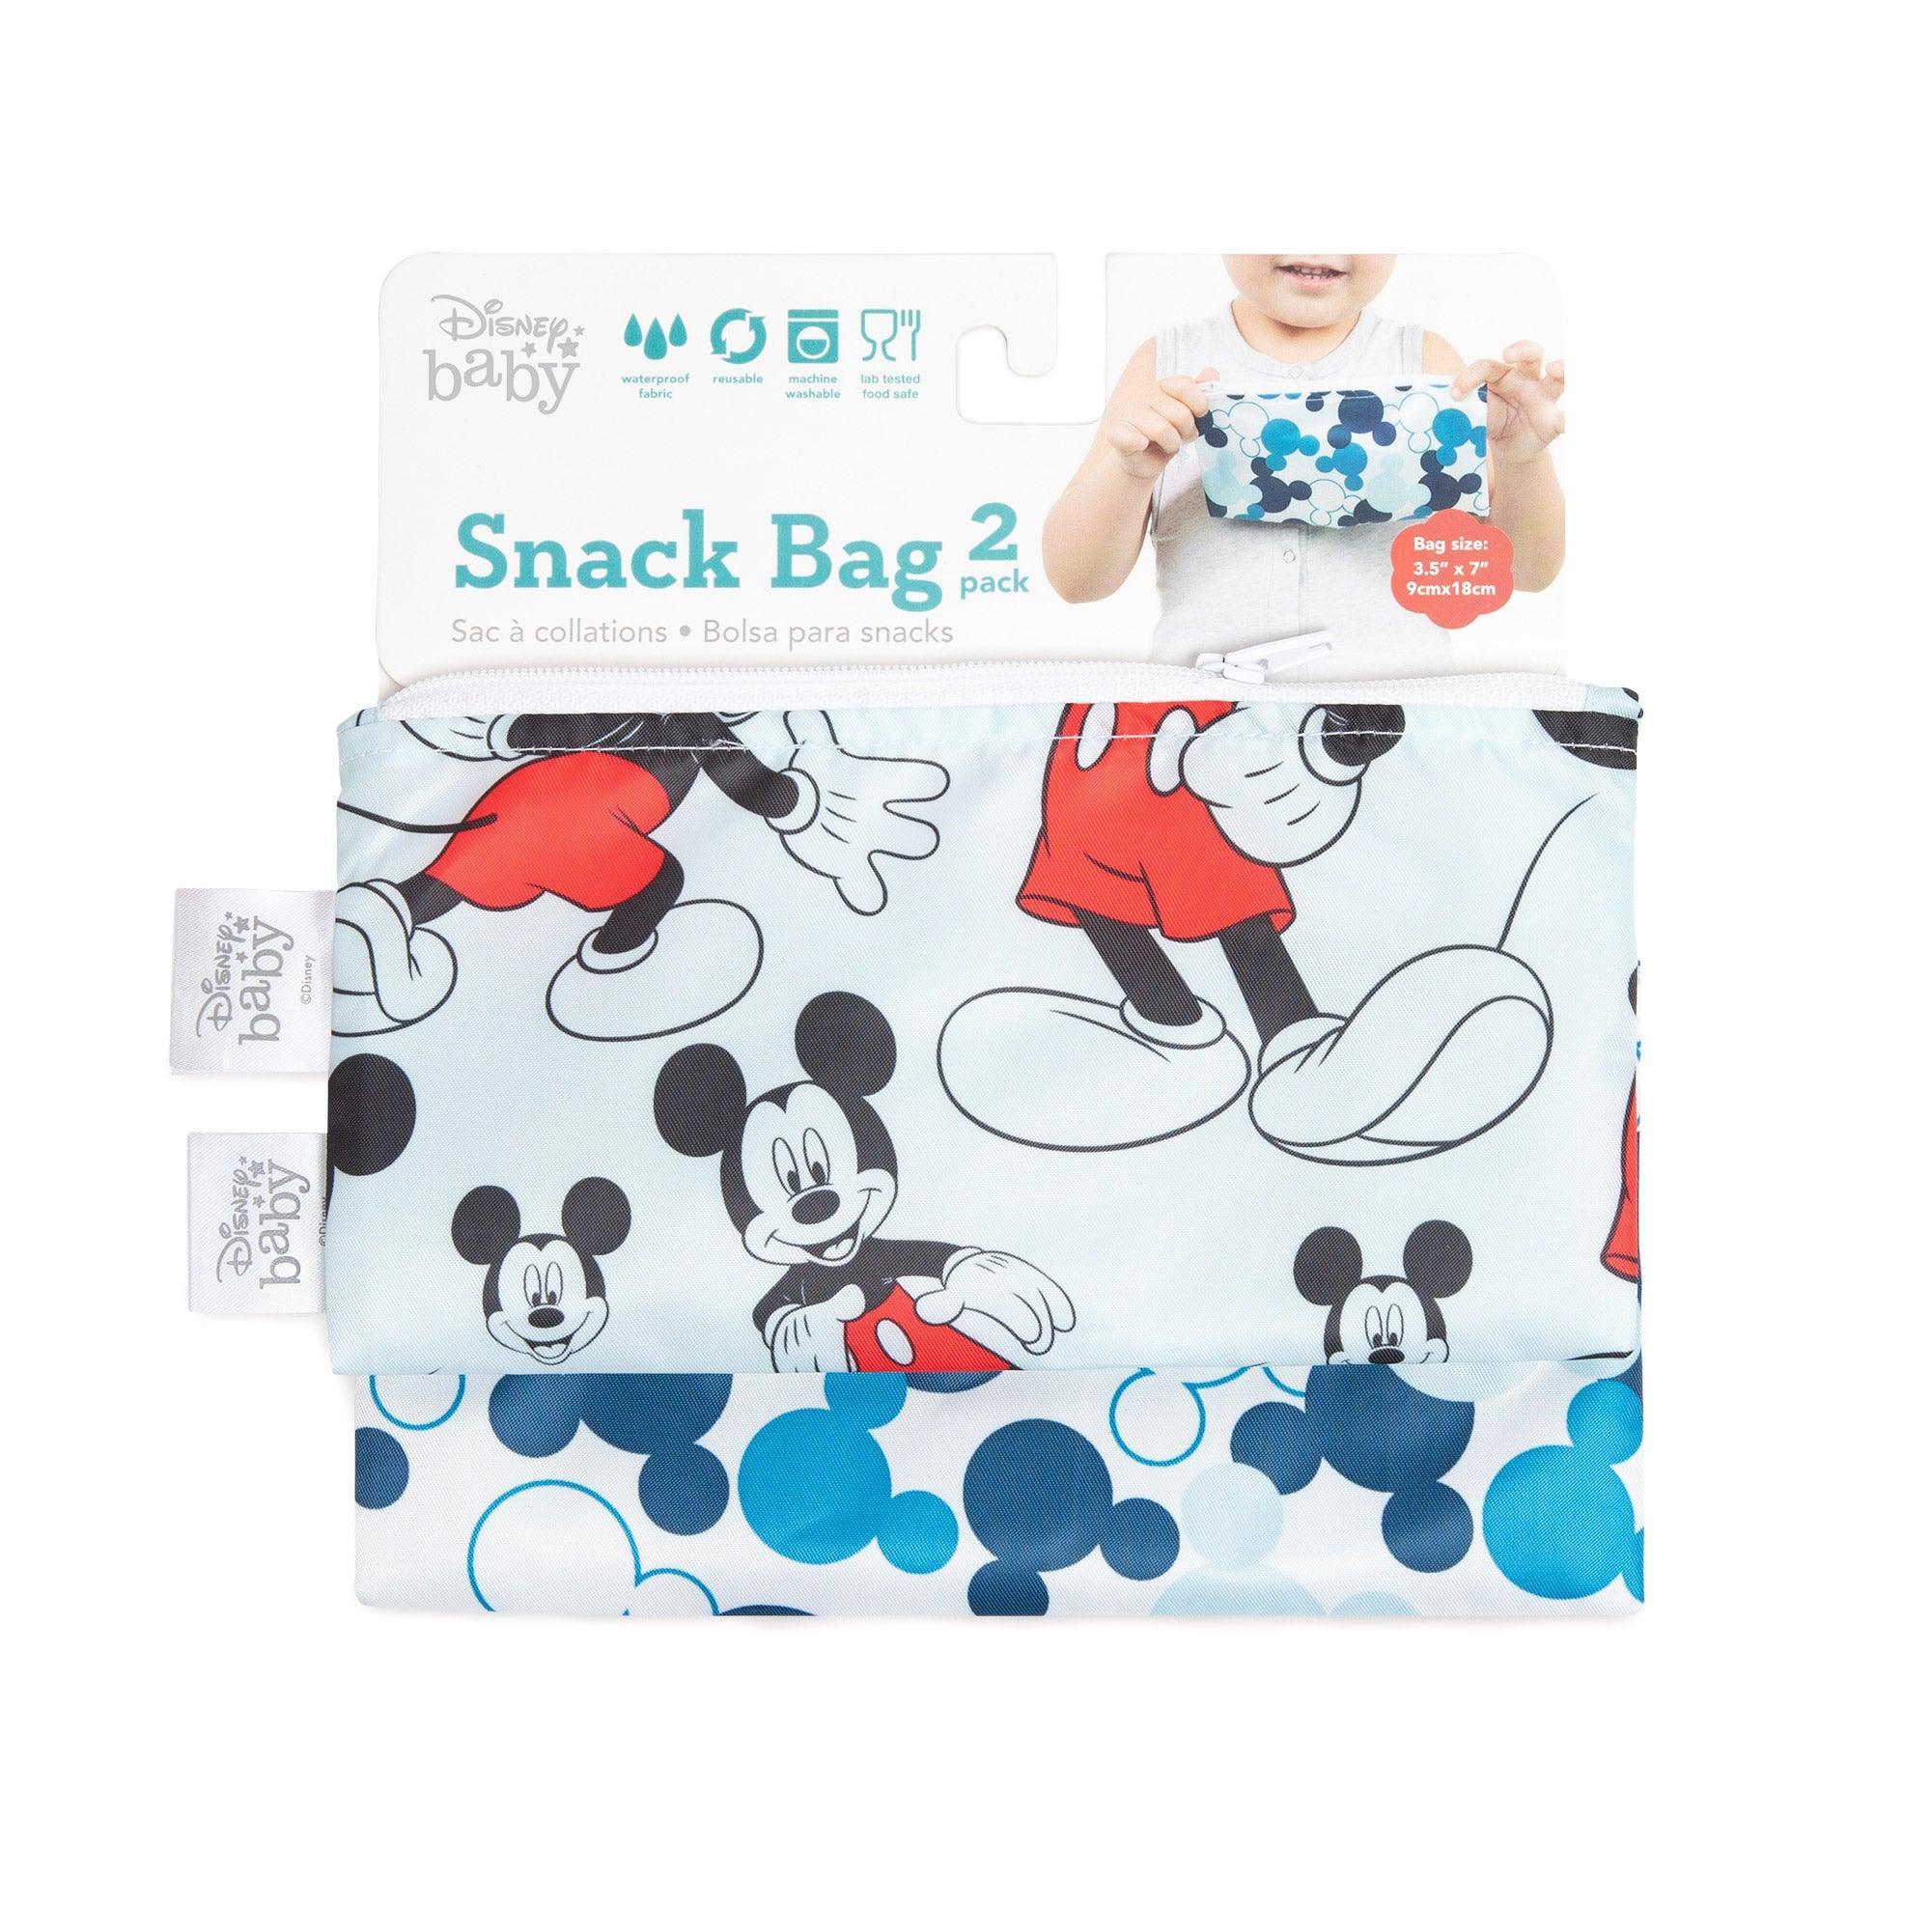 Bumkins Reusable Snack Bags Small Channel Kindness Pack